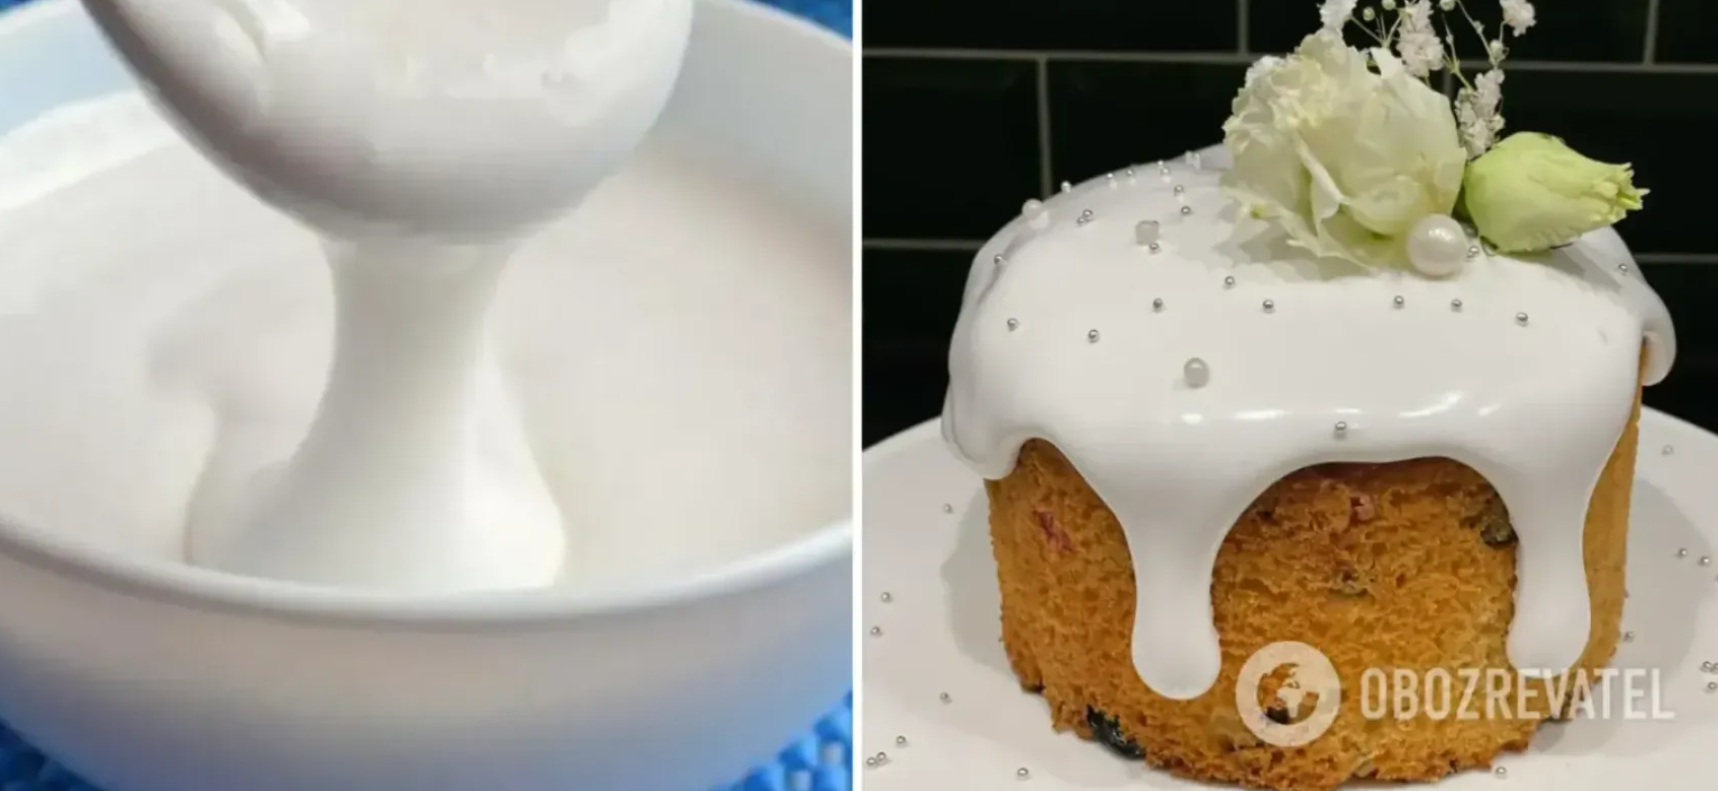 How to Make Gelatin Frosting for the Easter Cake